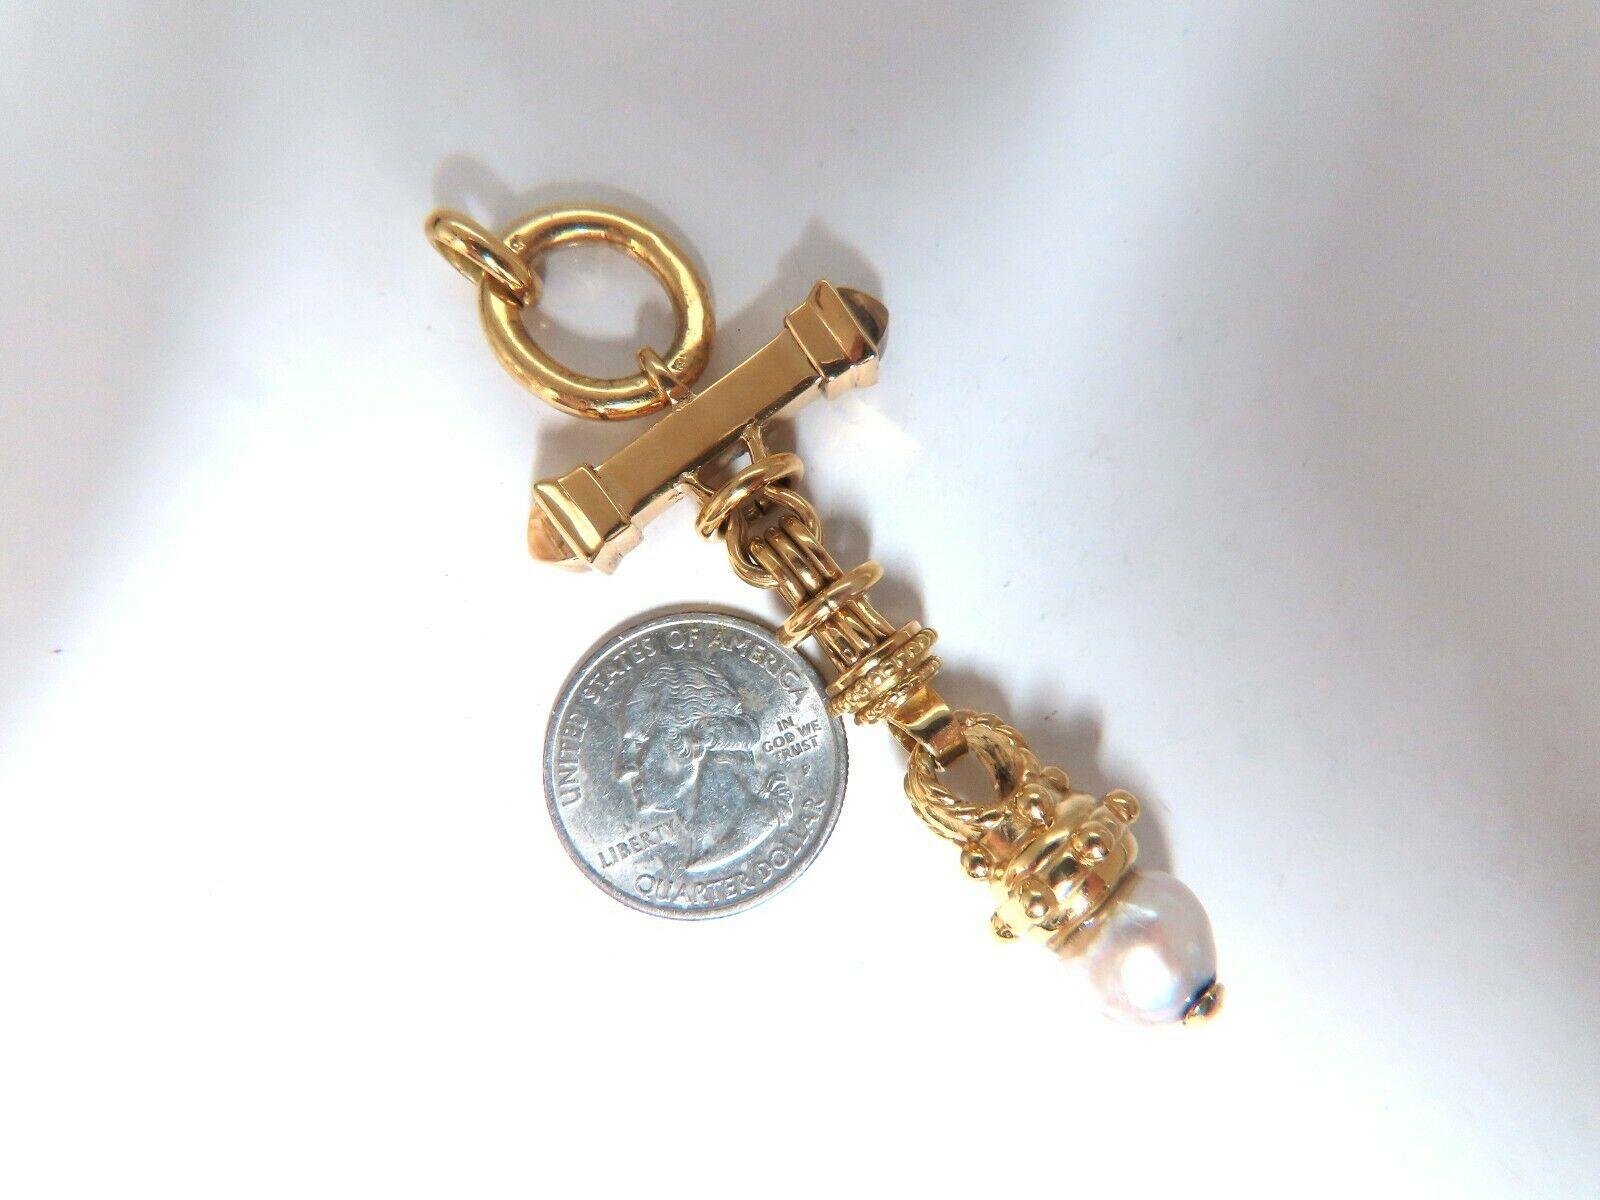 Celtic Dangle Goth Cross Necklace 

10.3mm Pearl

14kt. yellow gold.

3 x 1.3 inch

27.2 grams.